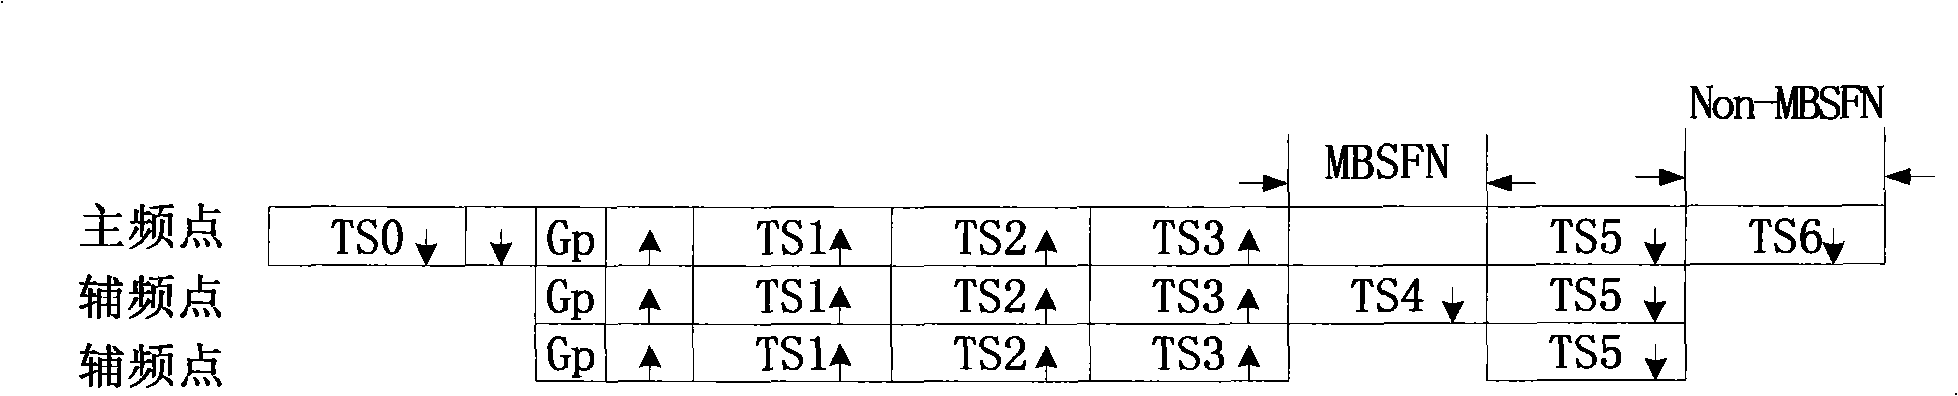 A method for enhancing MBMS service in multi-carrier cell